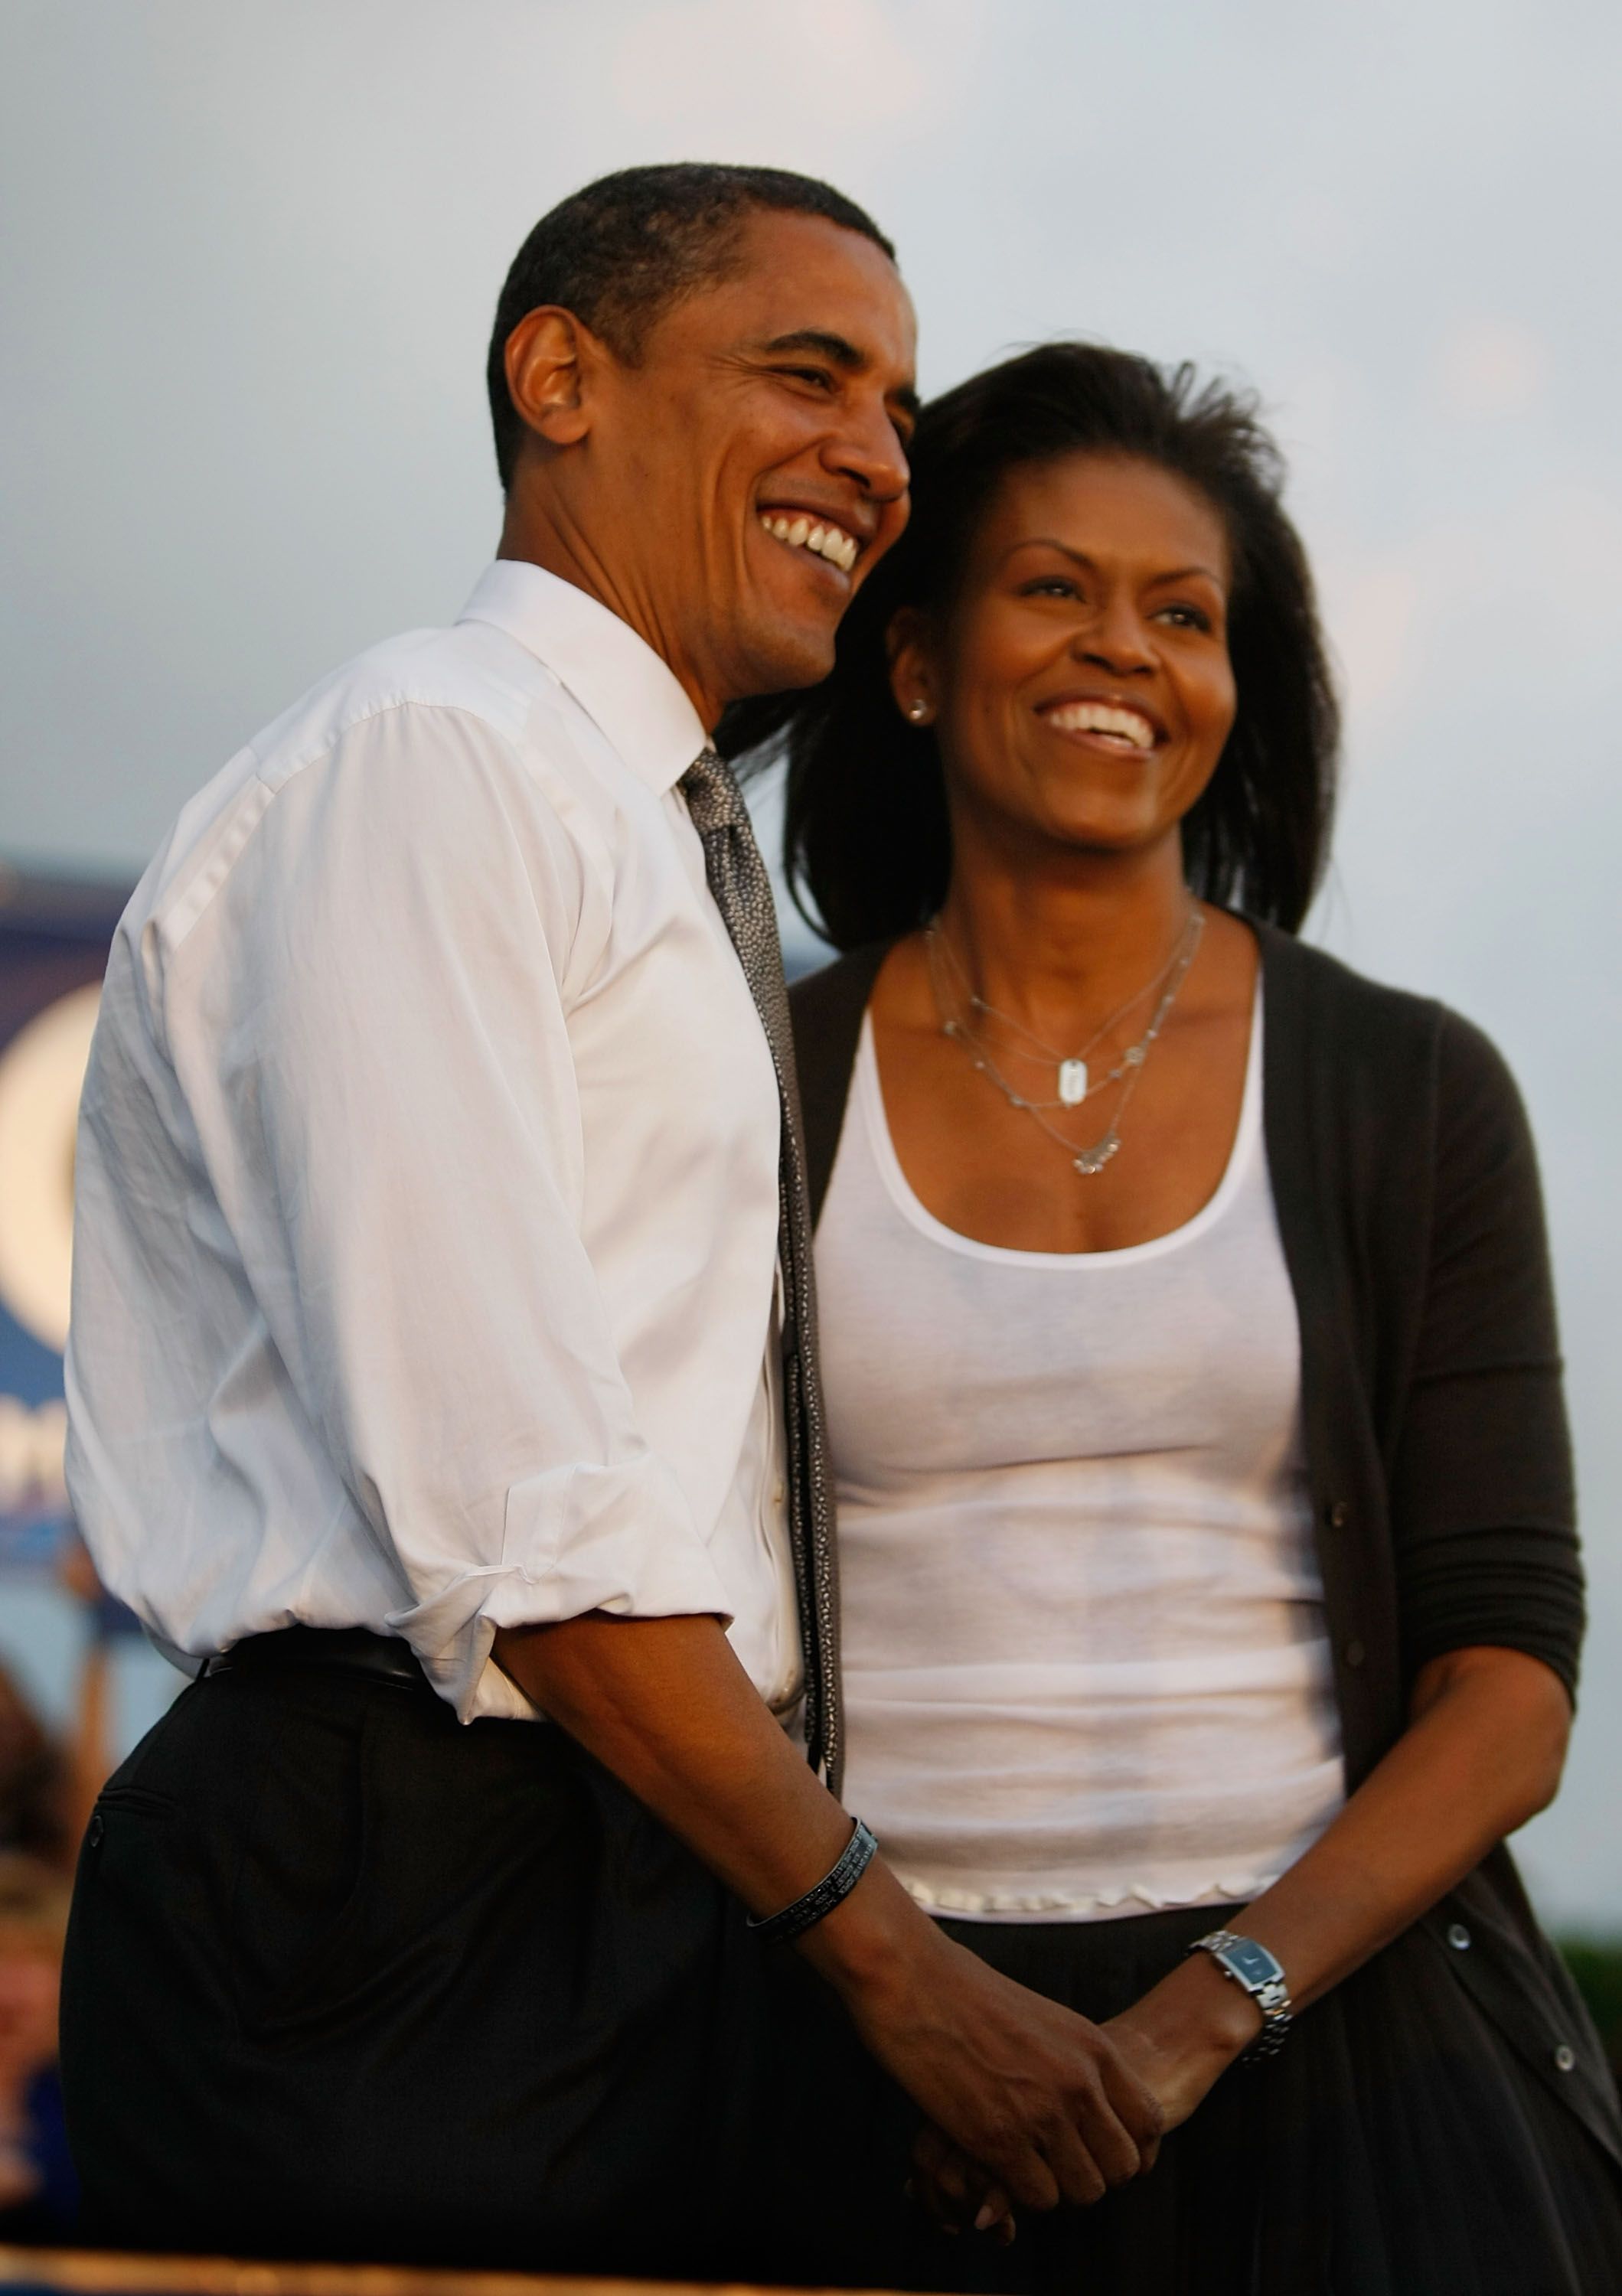 Democratic presidential nominee Barack Obama stands with his wife Michelle Obama during a campaign rally October 21, 2008 in Miami, Florida | Source: Getty Images 